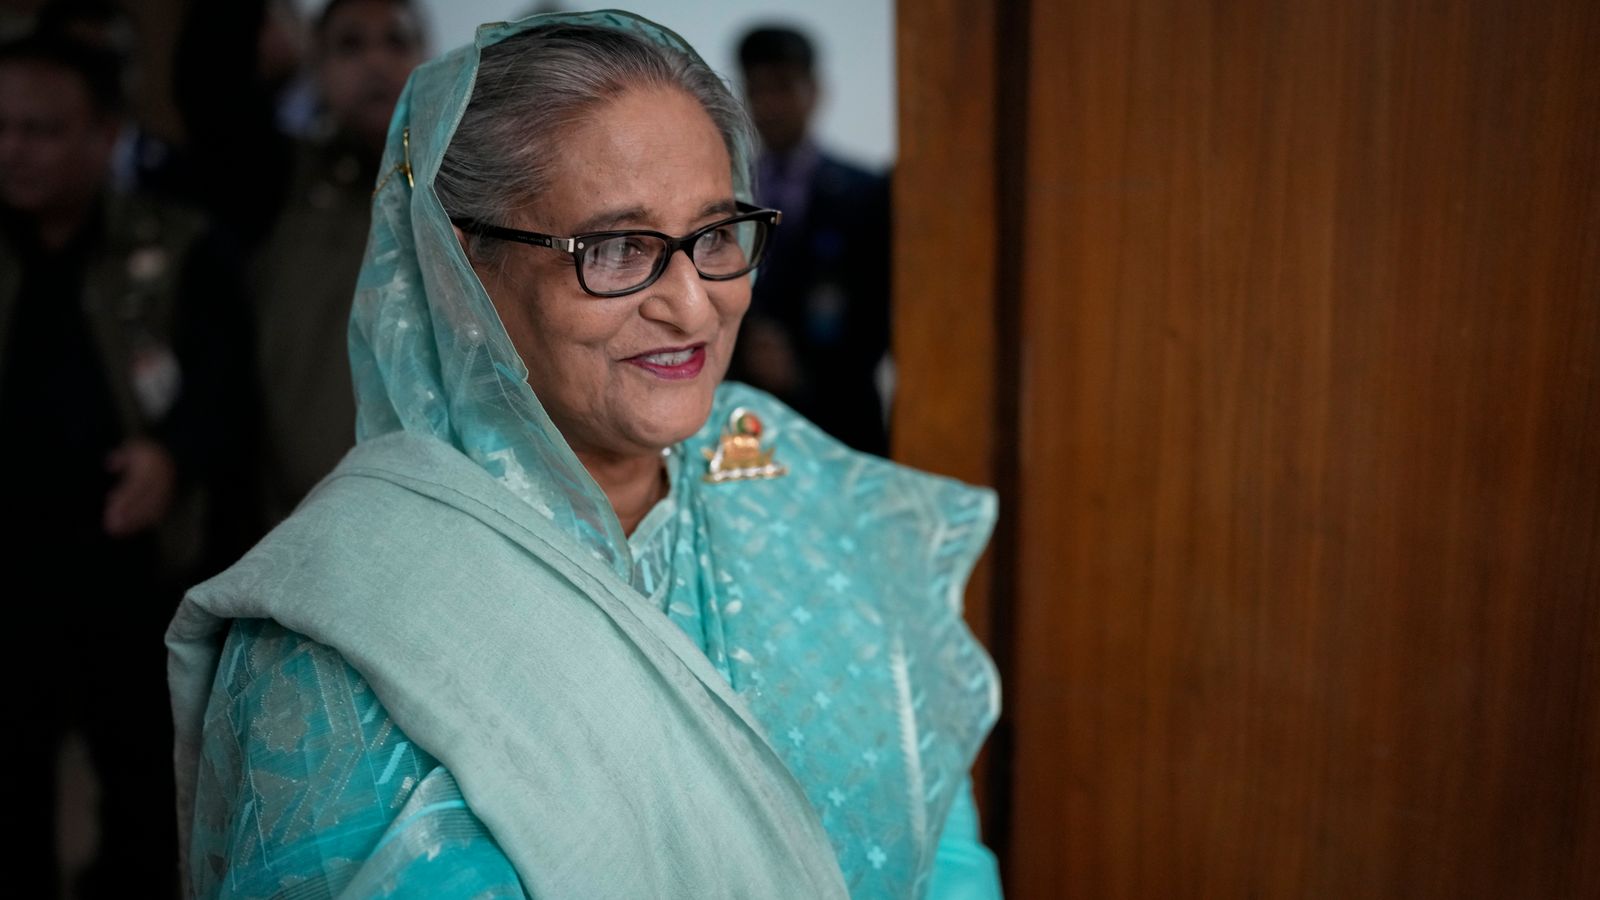 PM Hasina becomes Bangladesh's longest-serving leader after majority win in election 